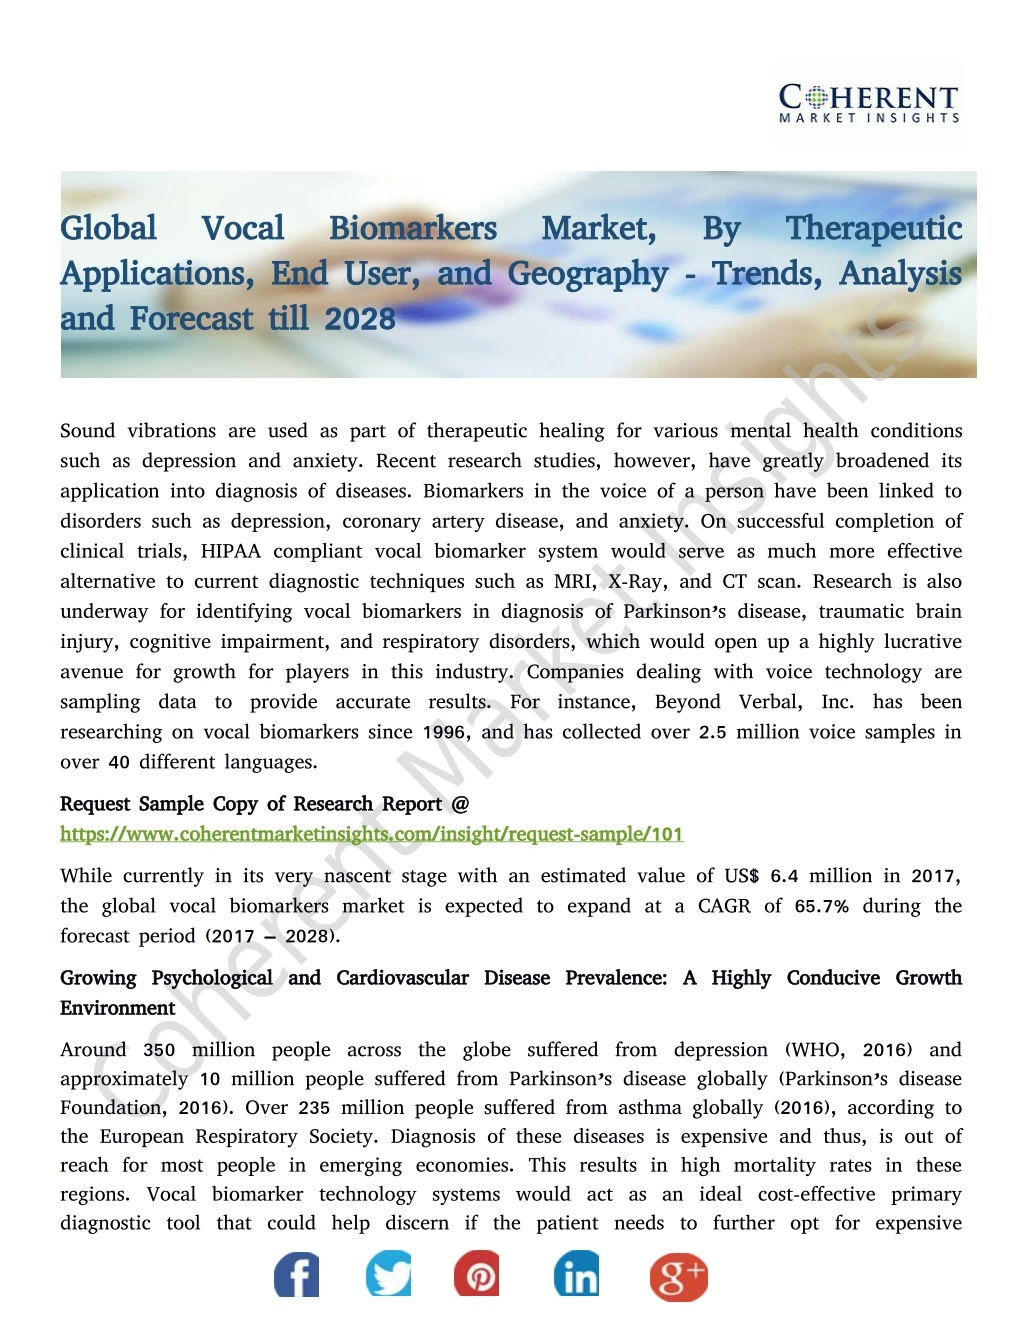 global vocal biomarkers market by therapeutic